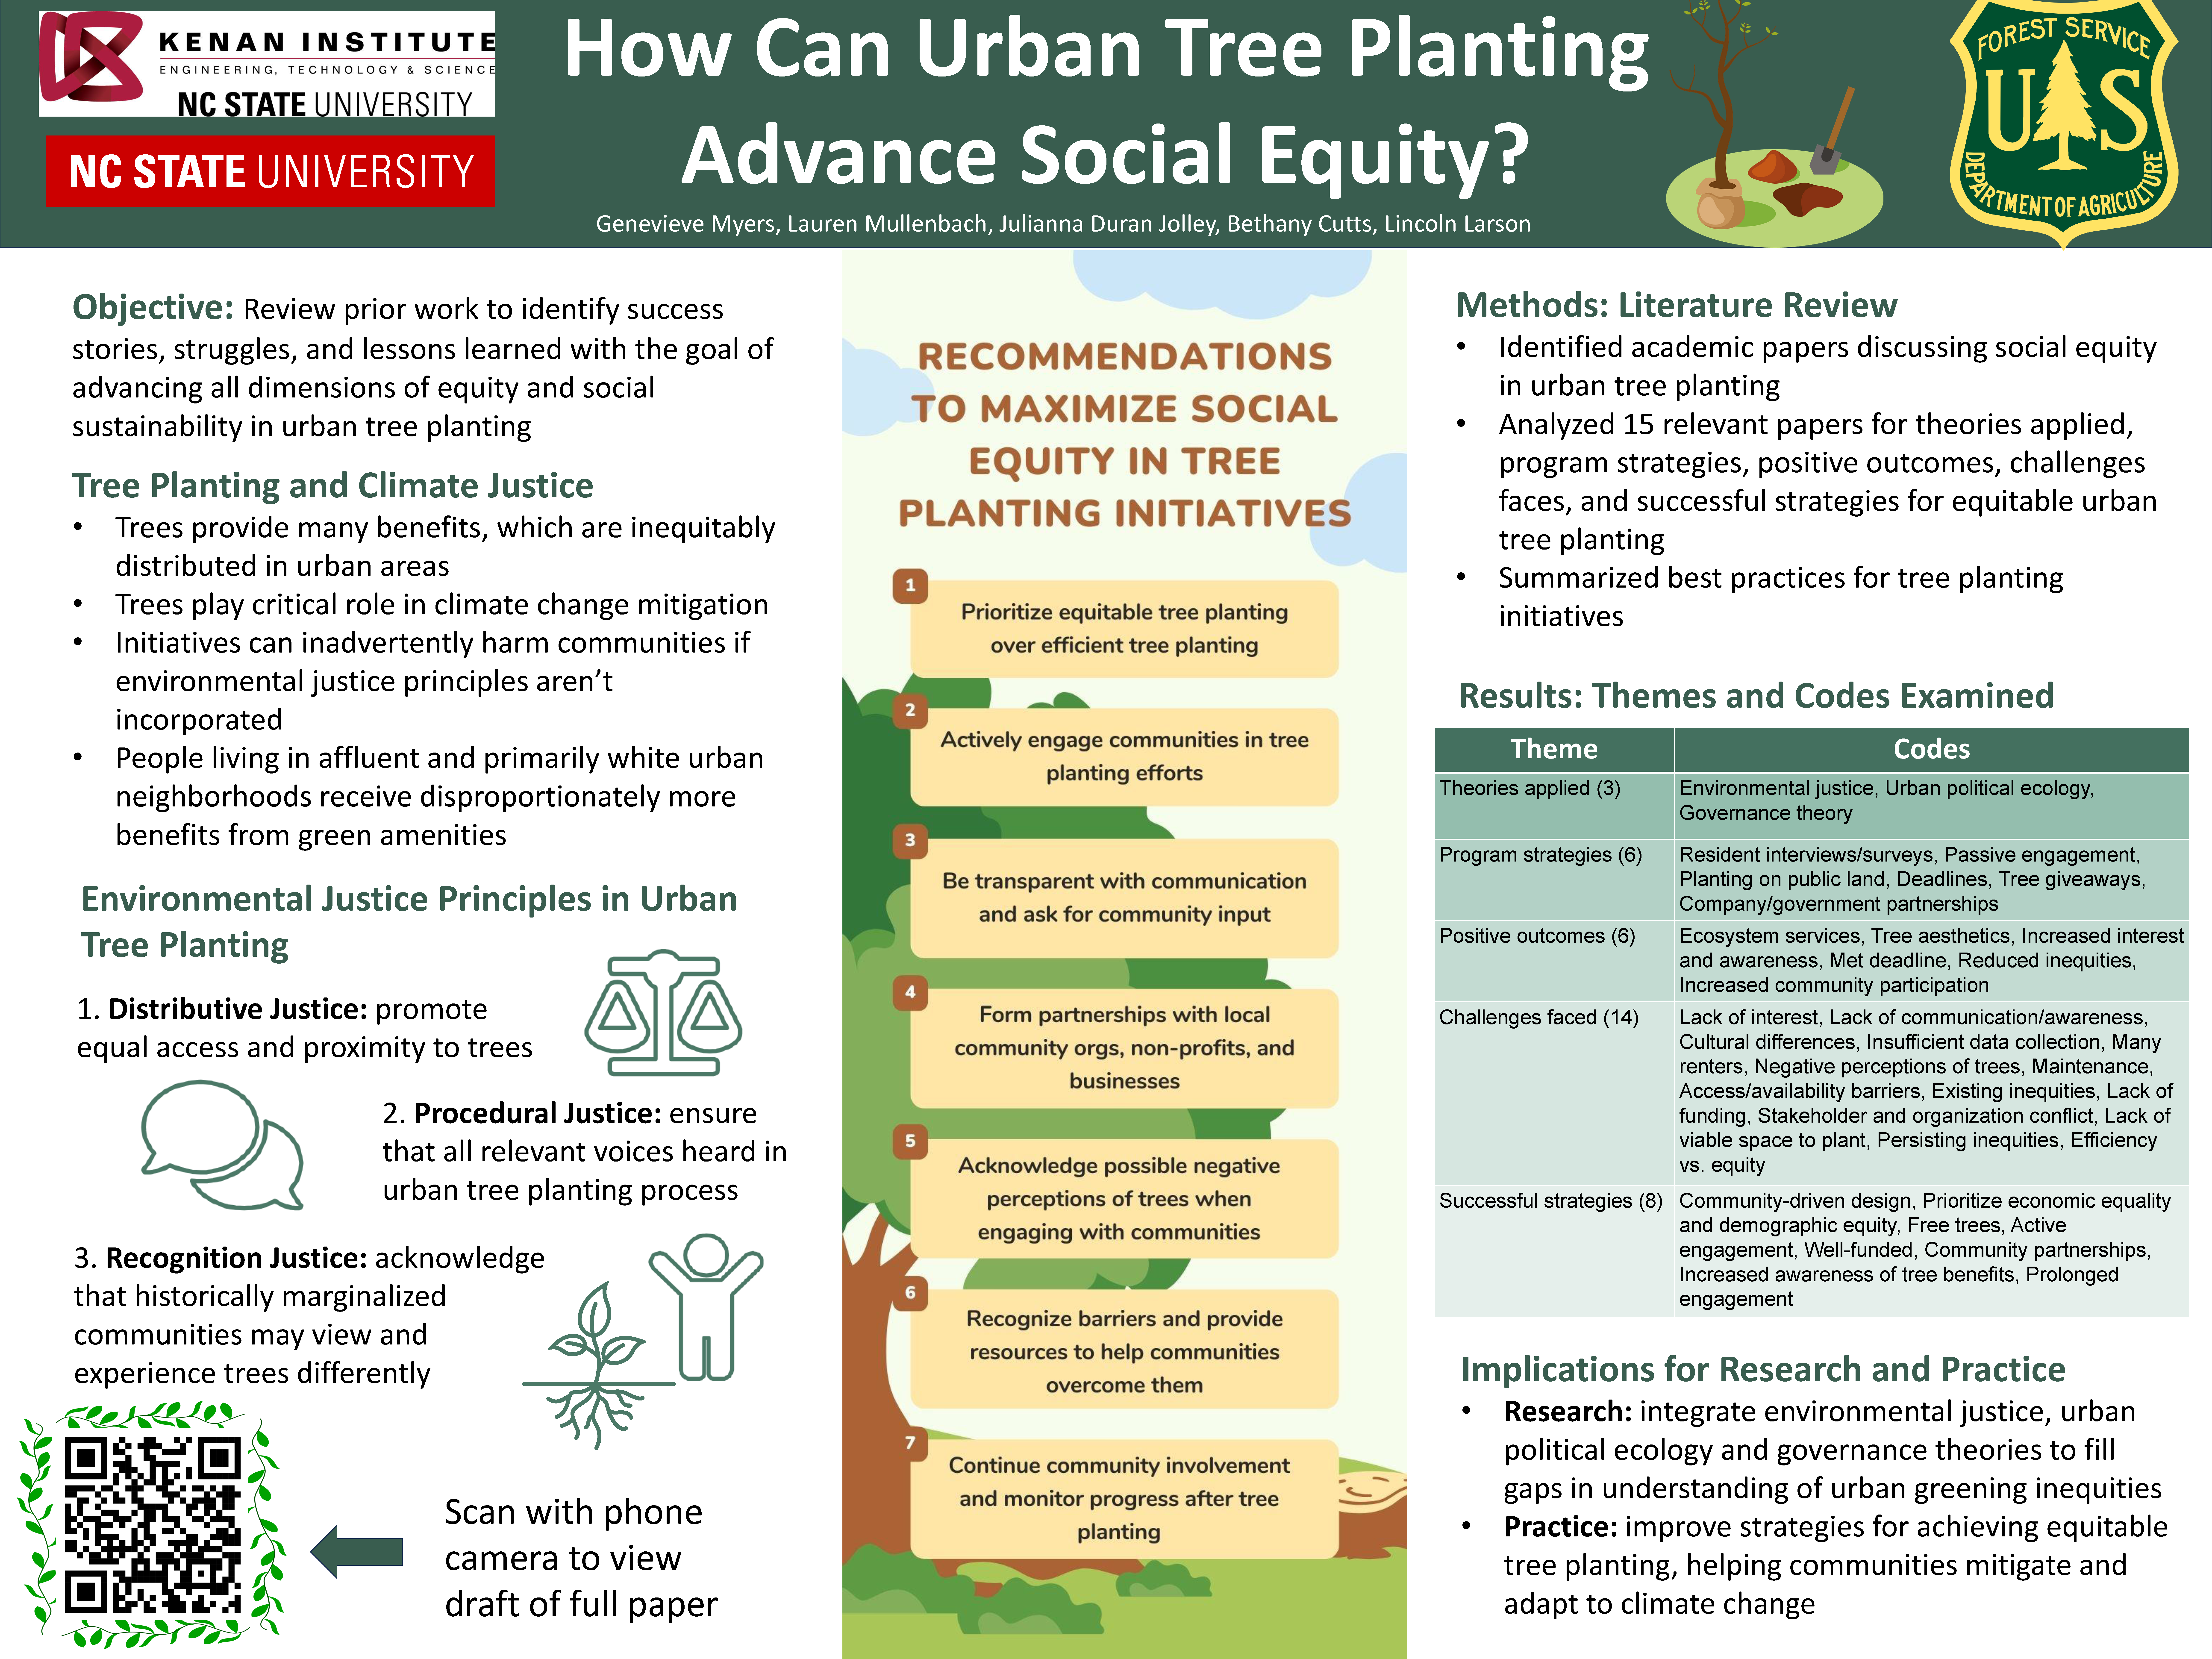 image of Genevieve Myer's poster, "How Can Urban Tree Planting Advance Social Equity?"